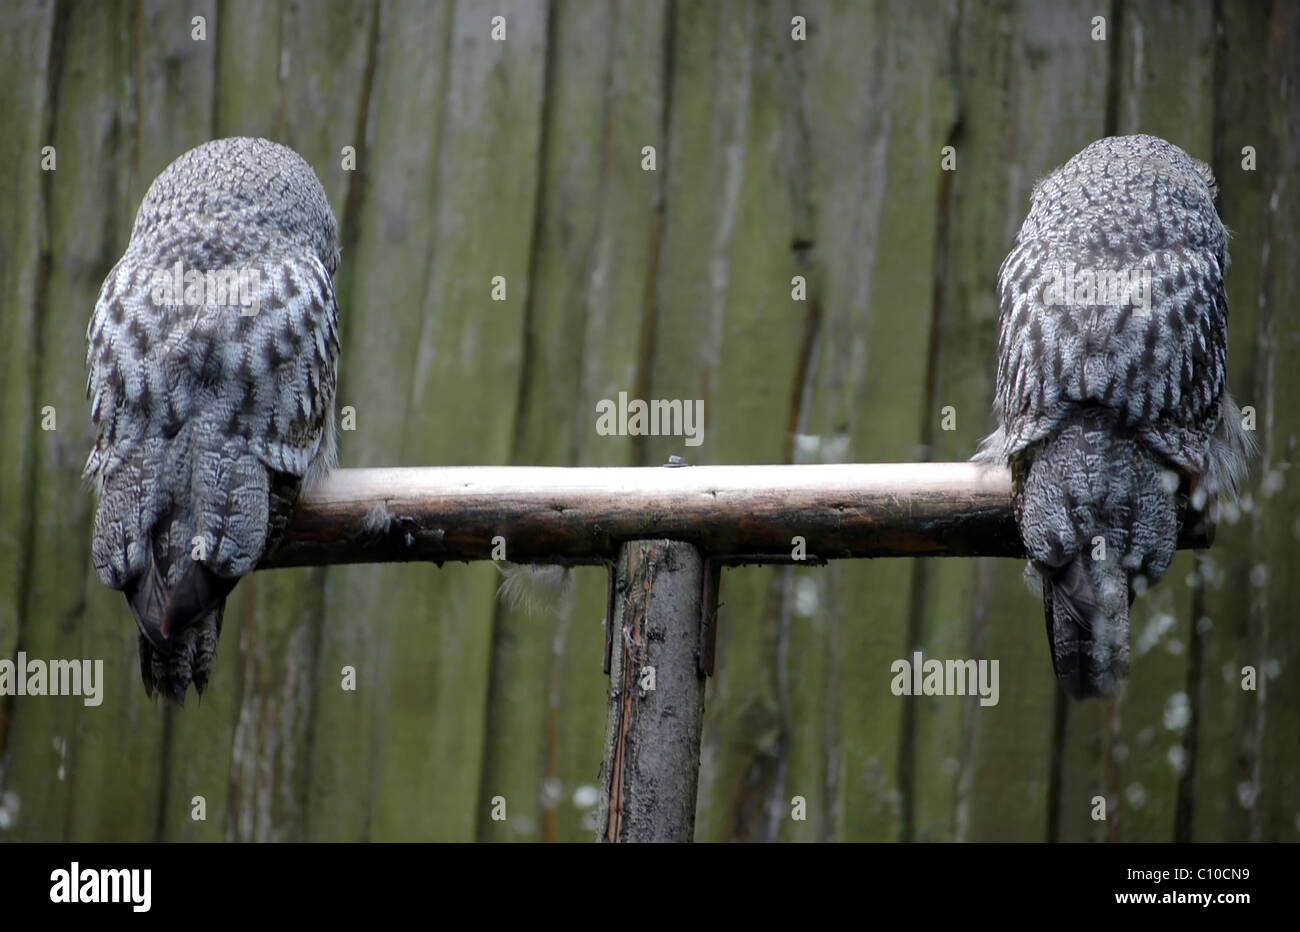 Two Great Horned Owl, Bubo Virginianus Subarcticus, from backside Stock Photo